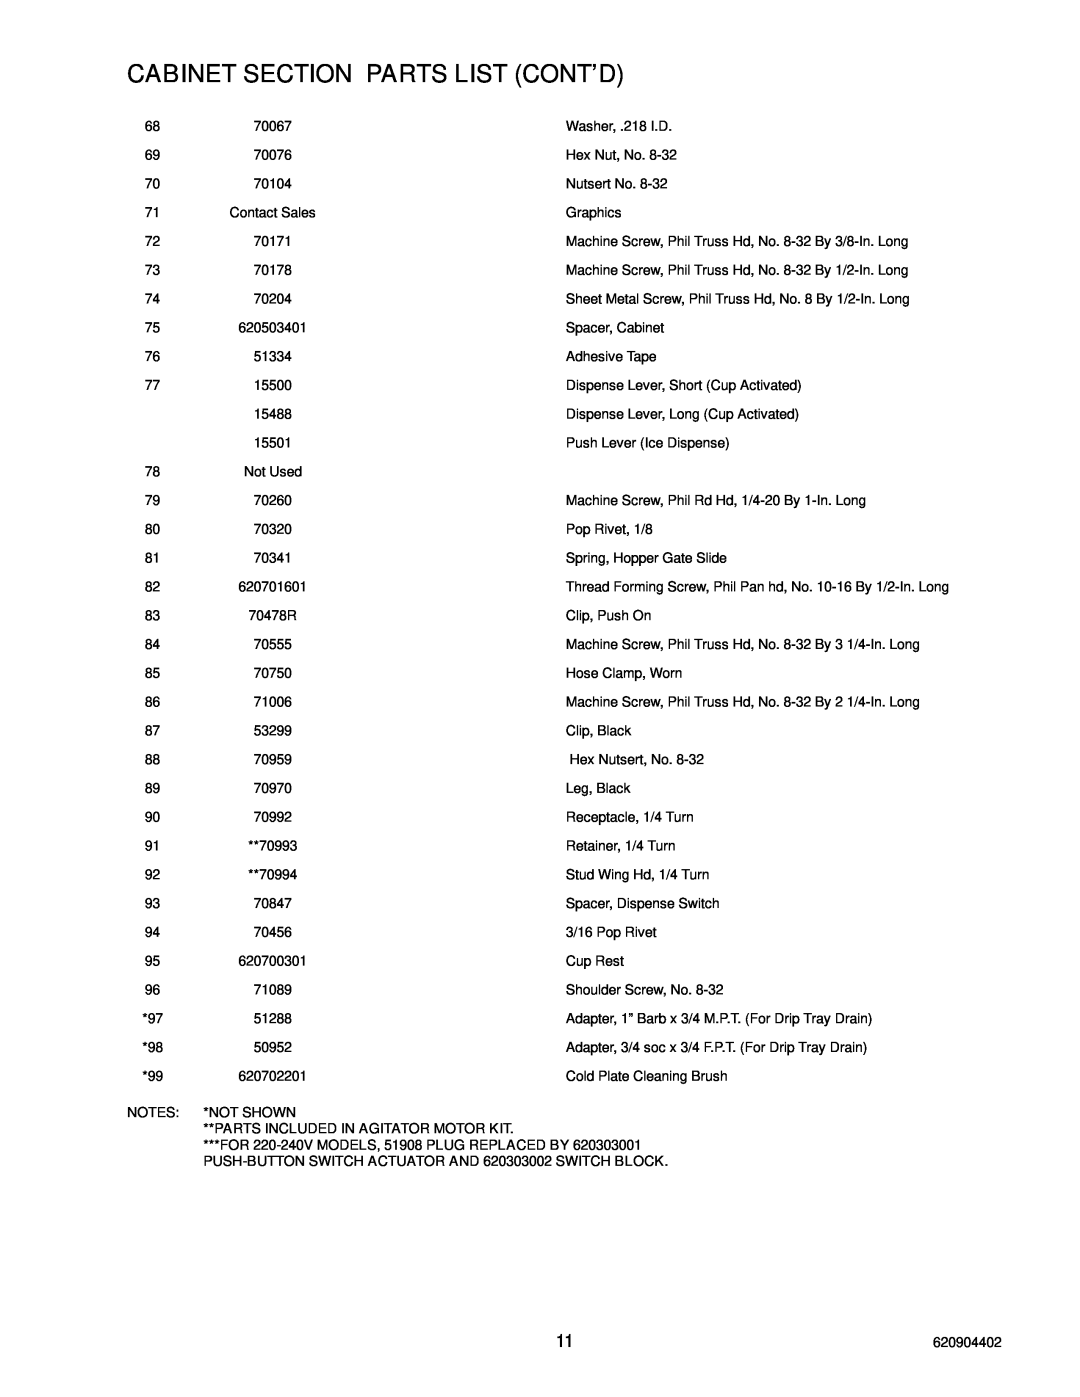 Cornelius 150 8 Valve manual Cabinet Section Parts List Cont’D, Not Shown, Parts Included In Agitator Motor Kit 